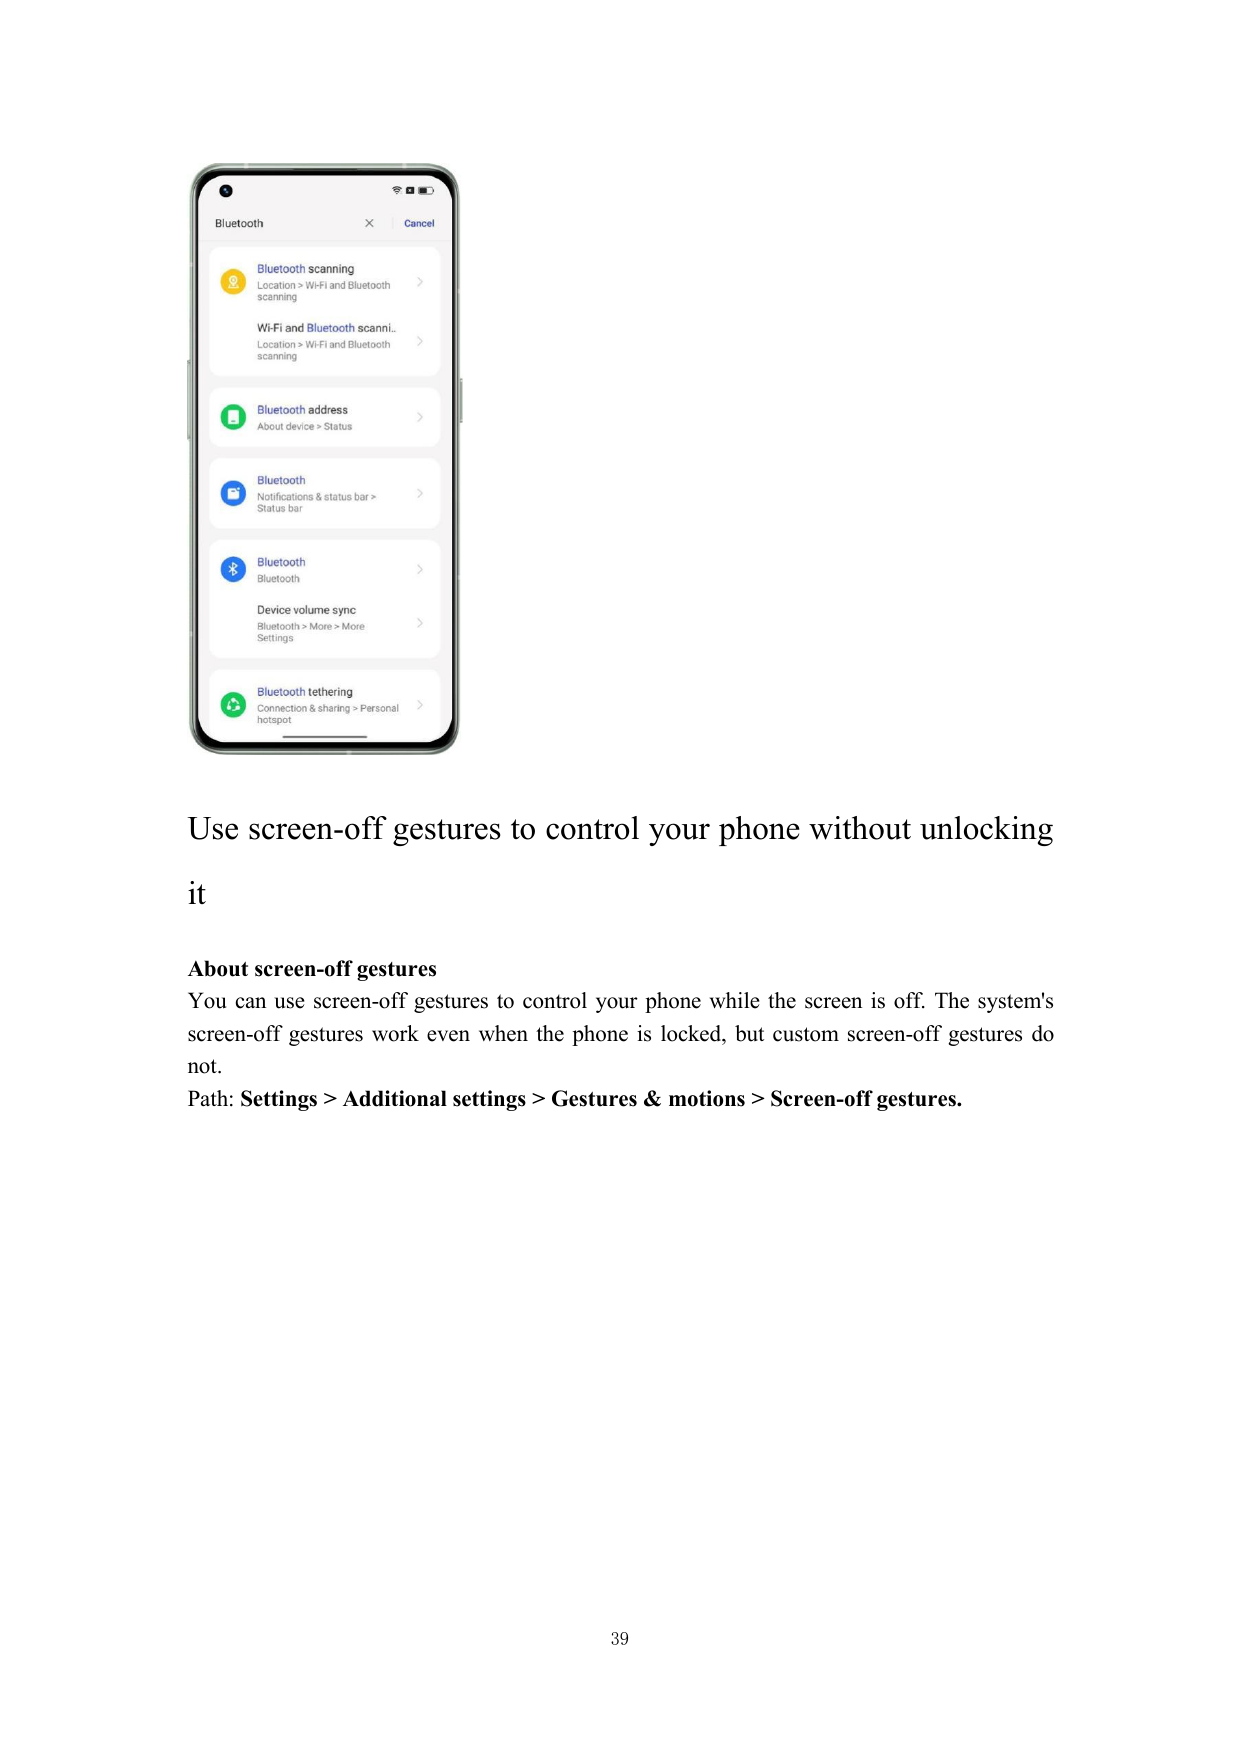 Use screen-off gestures to control your phone without unlockingitAbout screen-off gesturesYou can use screen-off gestures to con